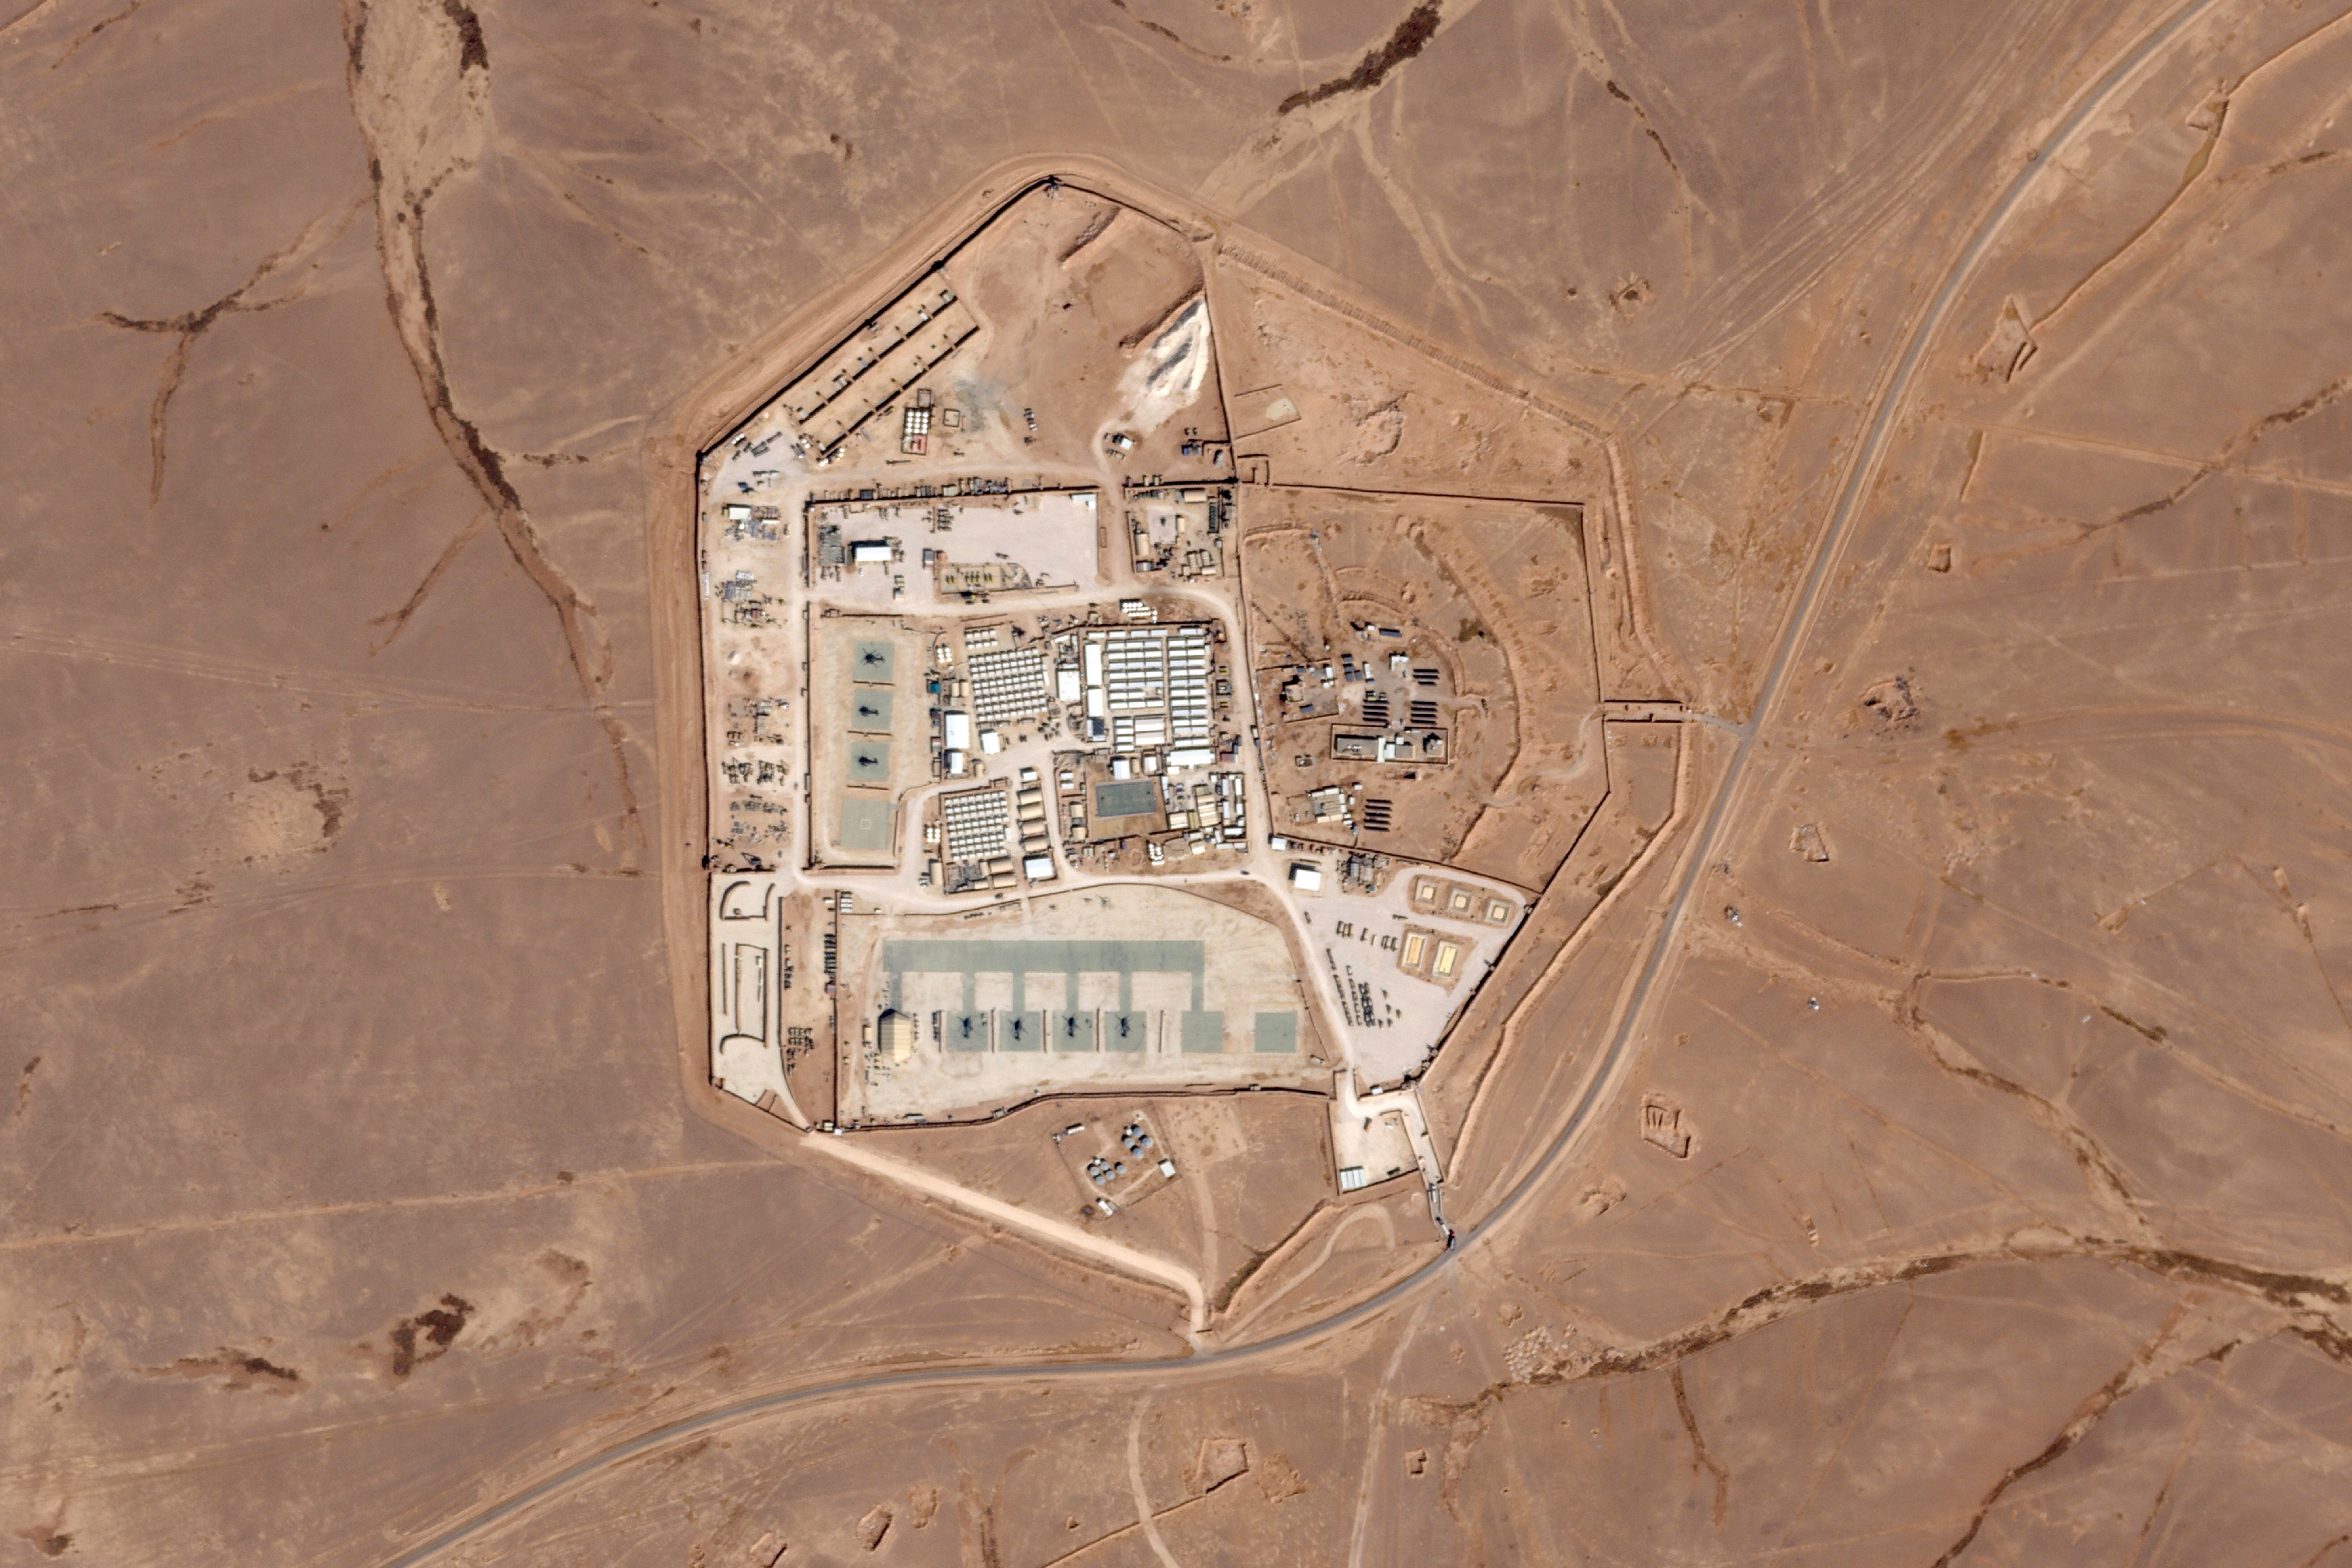 This satellite photo shows a military base known as Tower 22 in northeastern Jordan, where three American troops were killed and ‘many' were wounded on Sunday